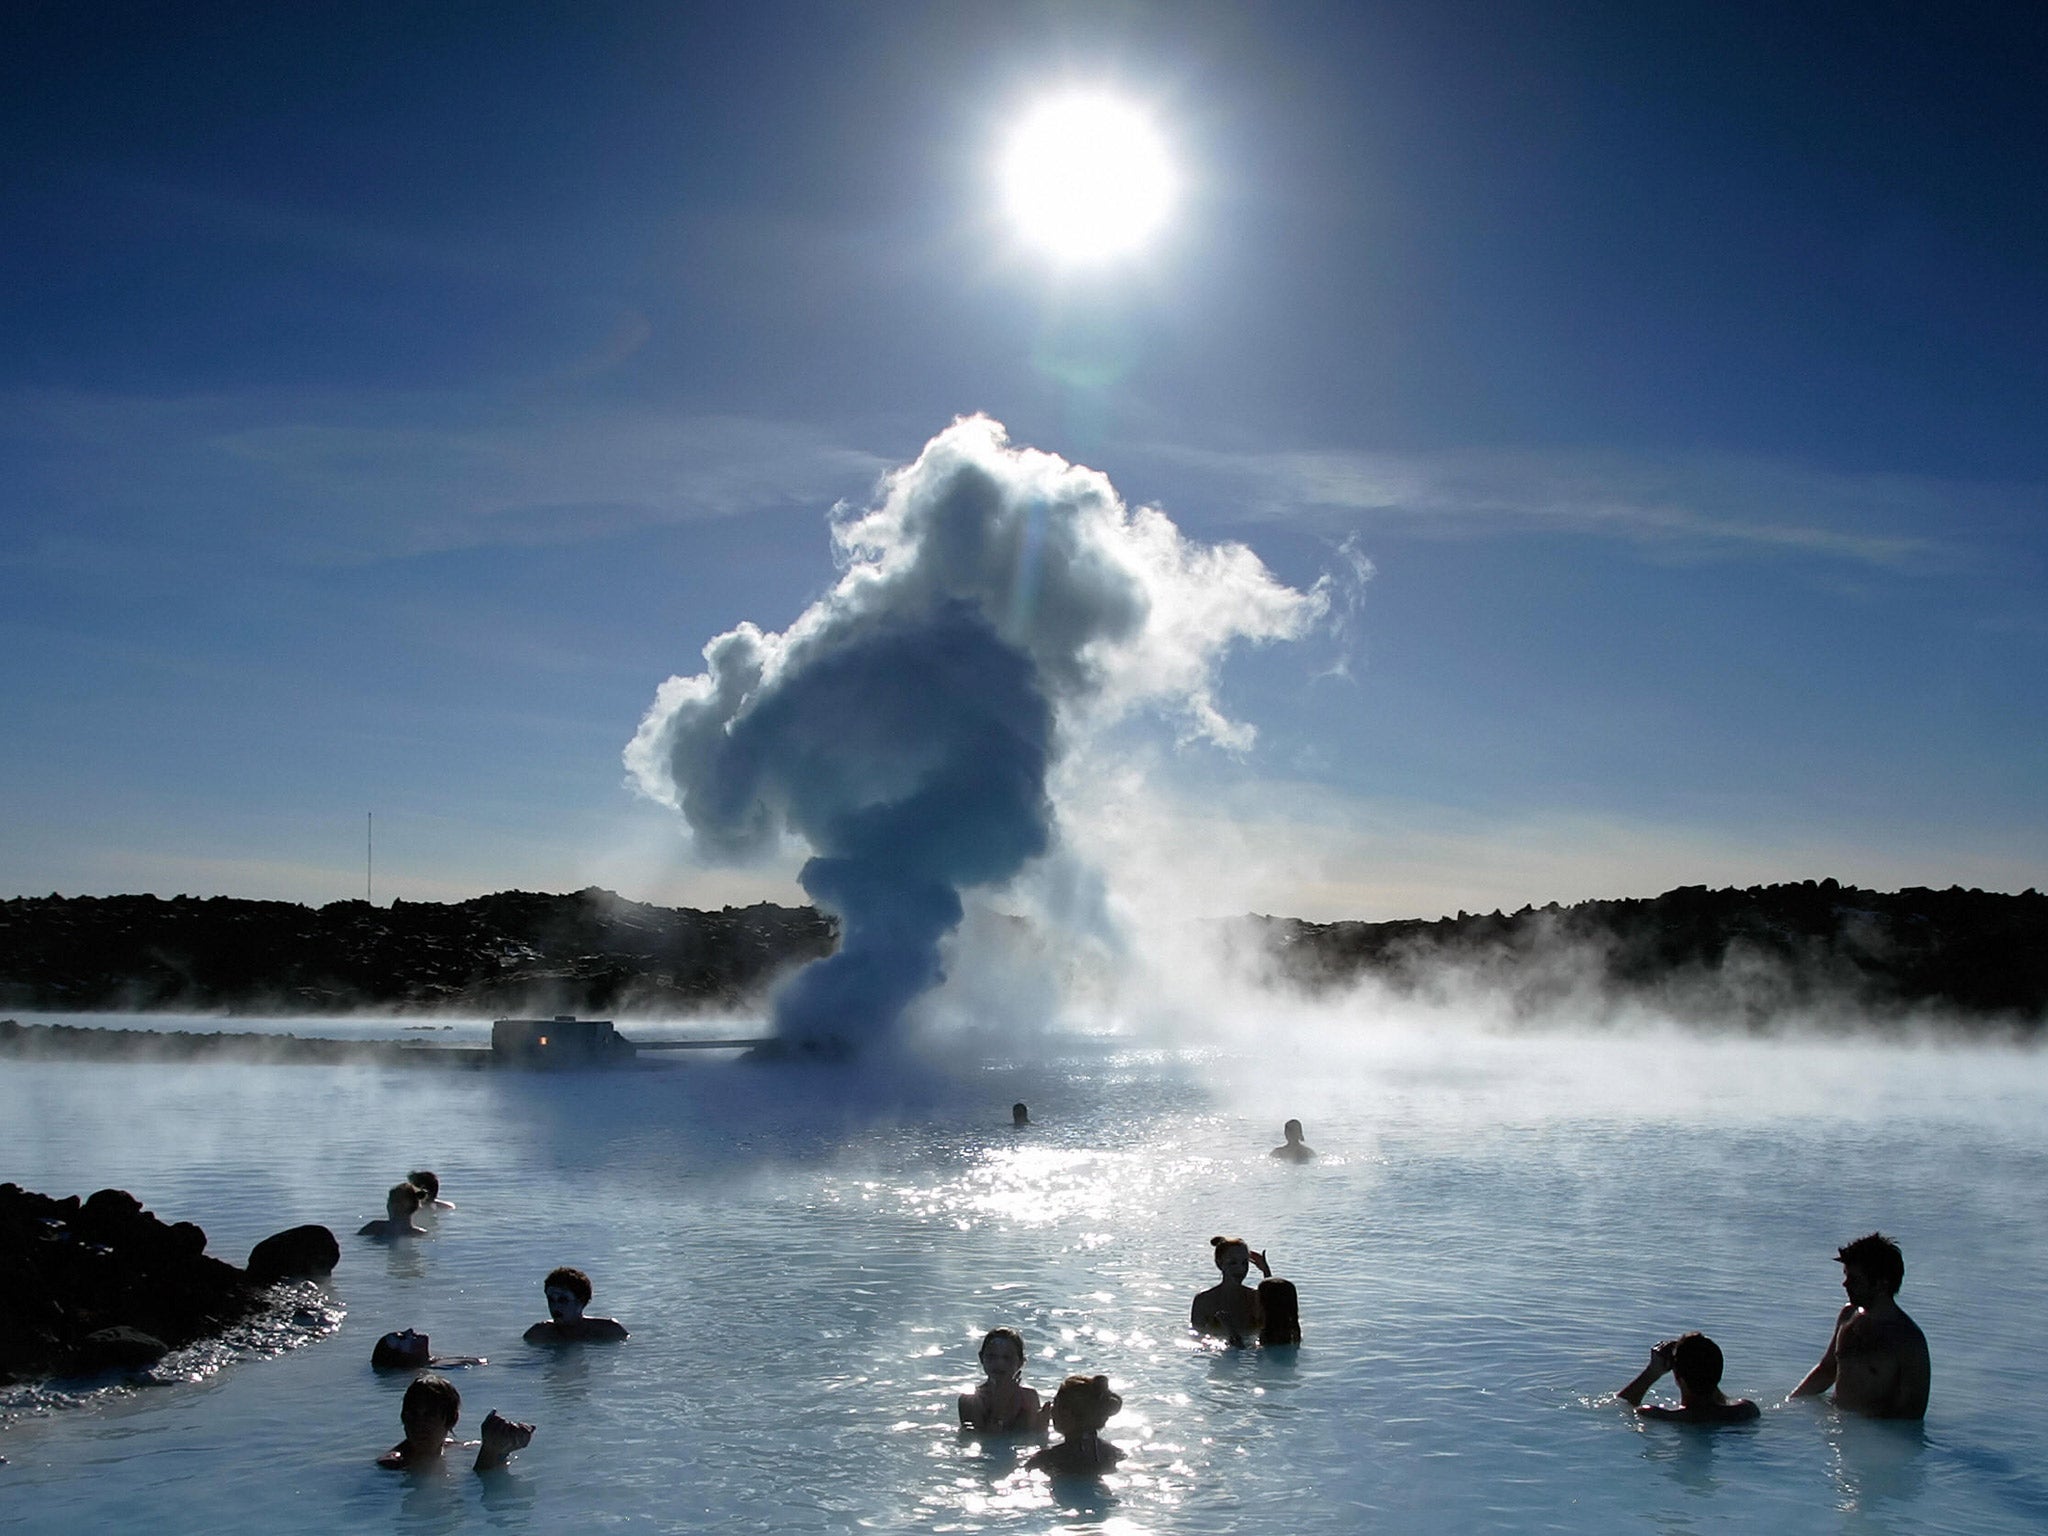 The Blue Lagoon, one of Iceland's most popular tourist destinations